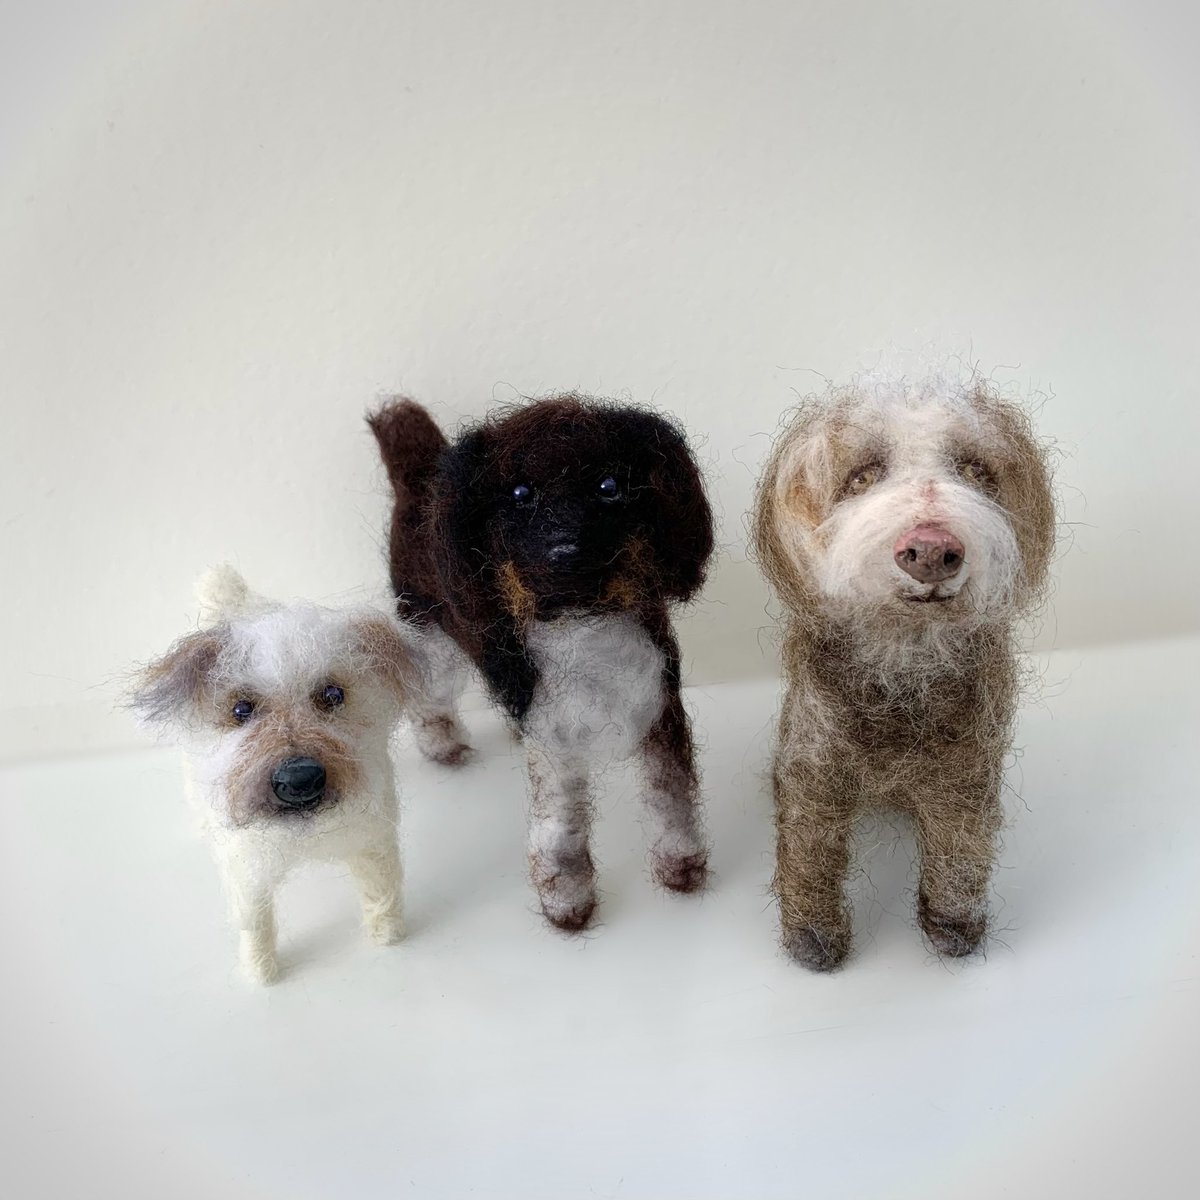 These cuties all live together in the States 💕 Safe journey my friends. I enjoyed making you.
#needlefelting #pets #dogs #fibreart #art #sculpture #gifts #cute #lynnedaviesart